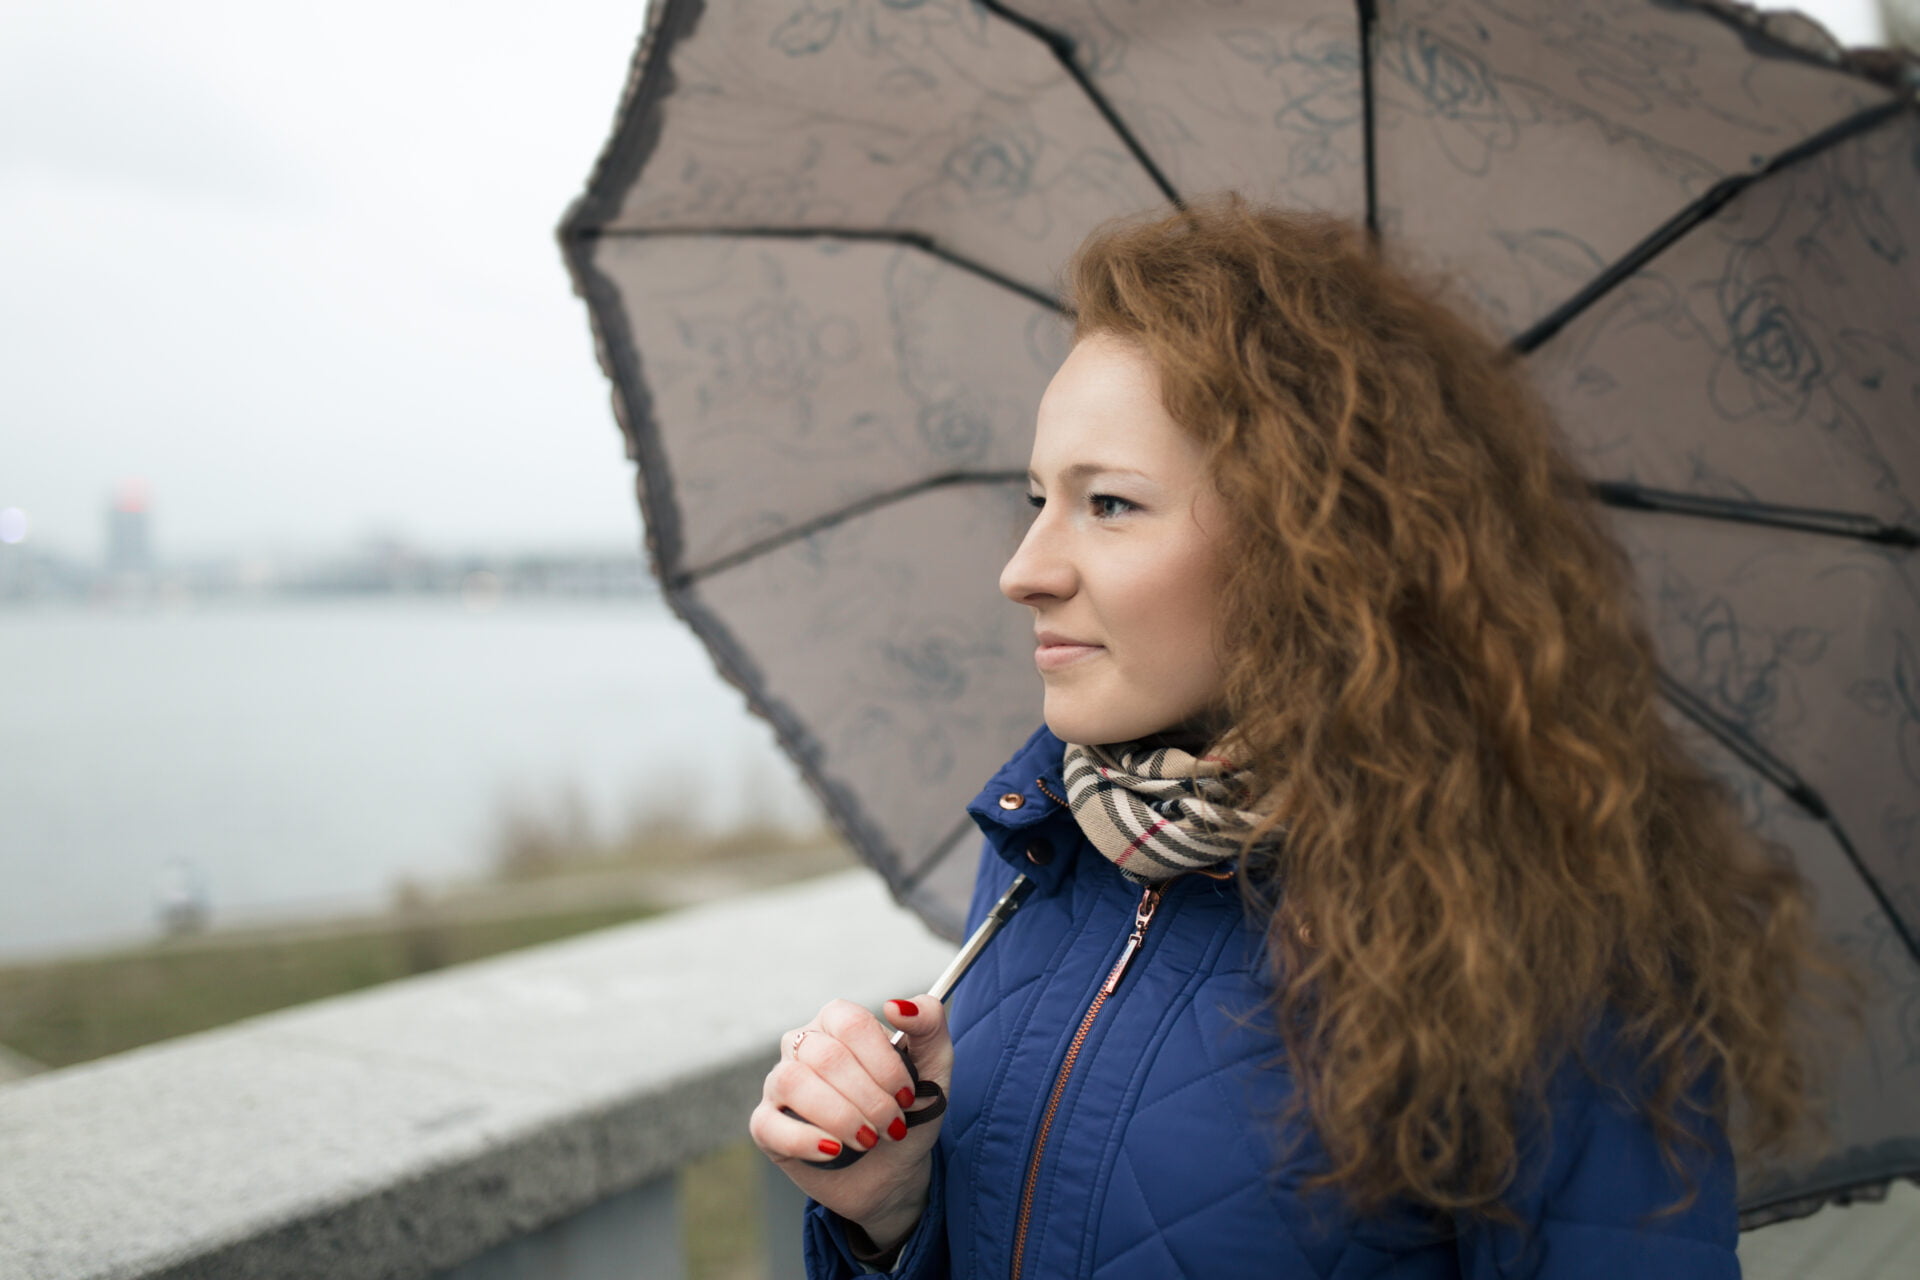 Young woman walking at quay with umbrella on a rainy day